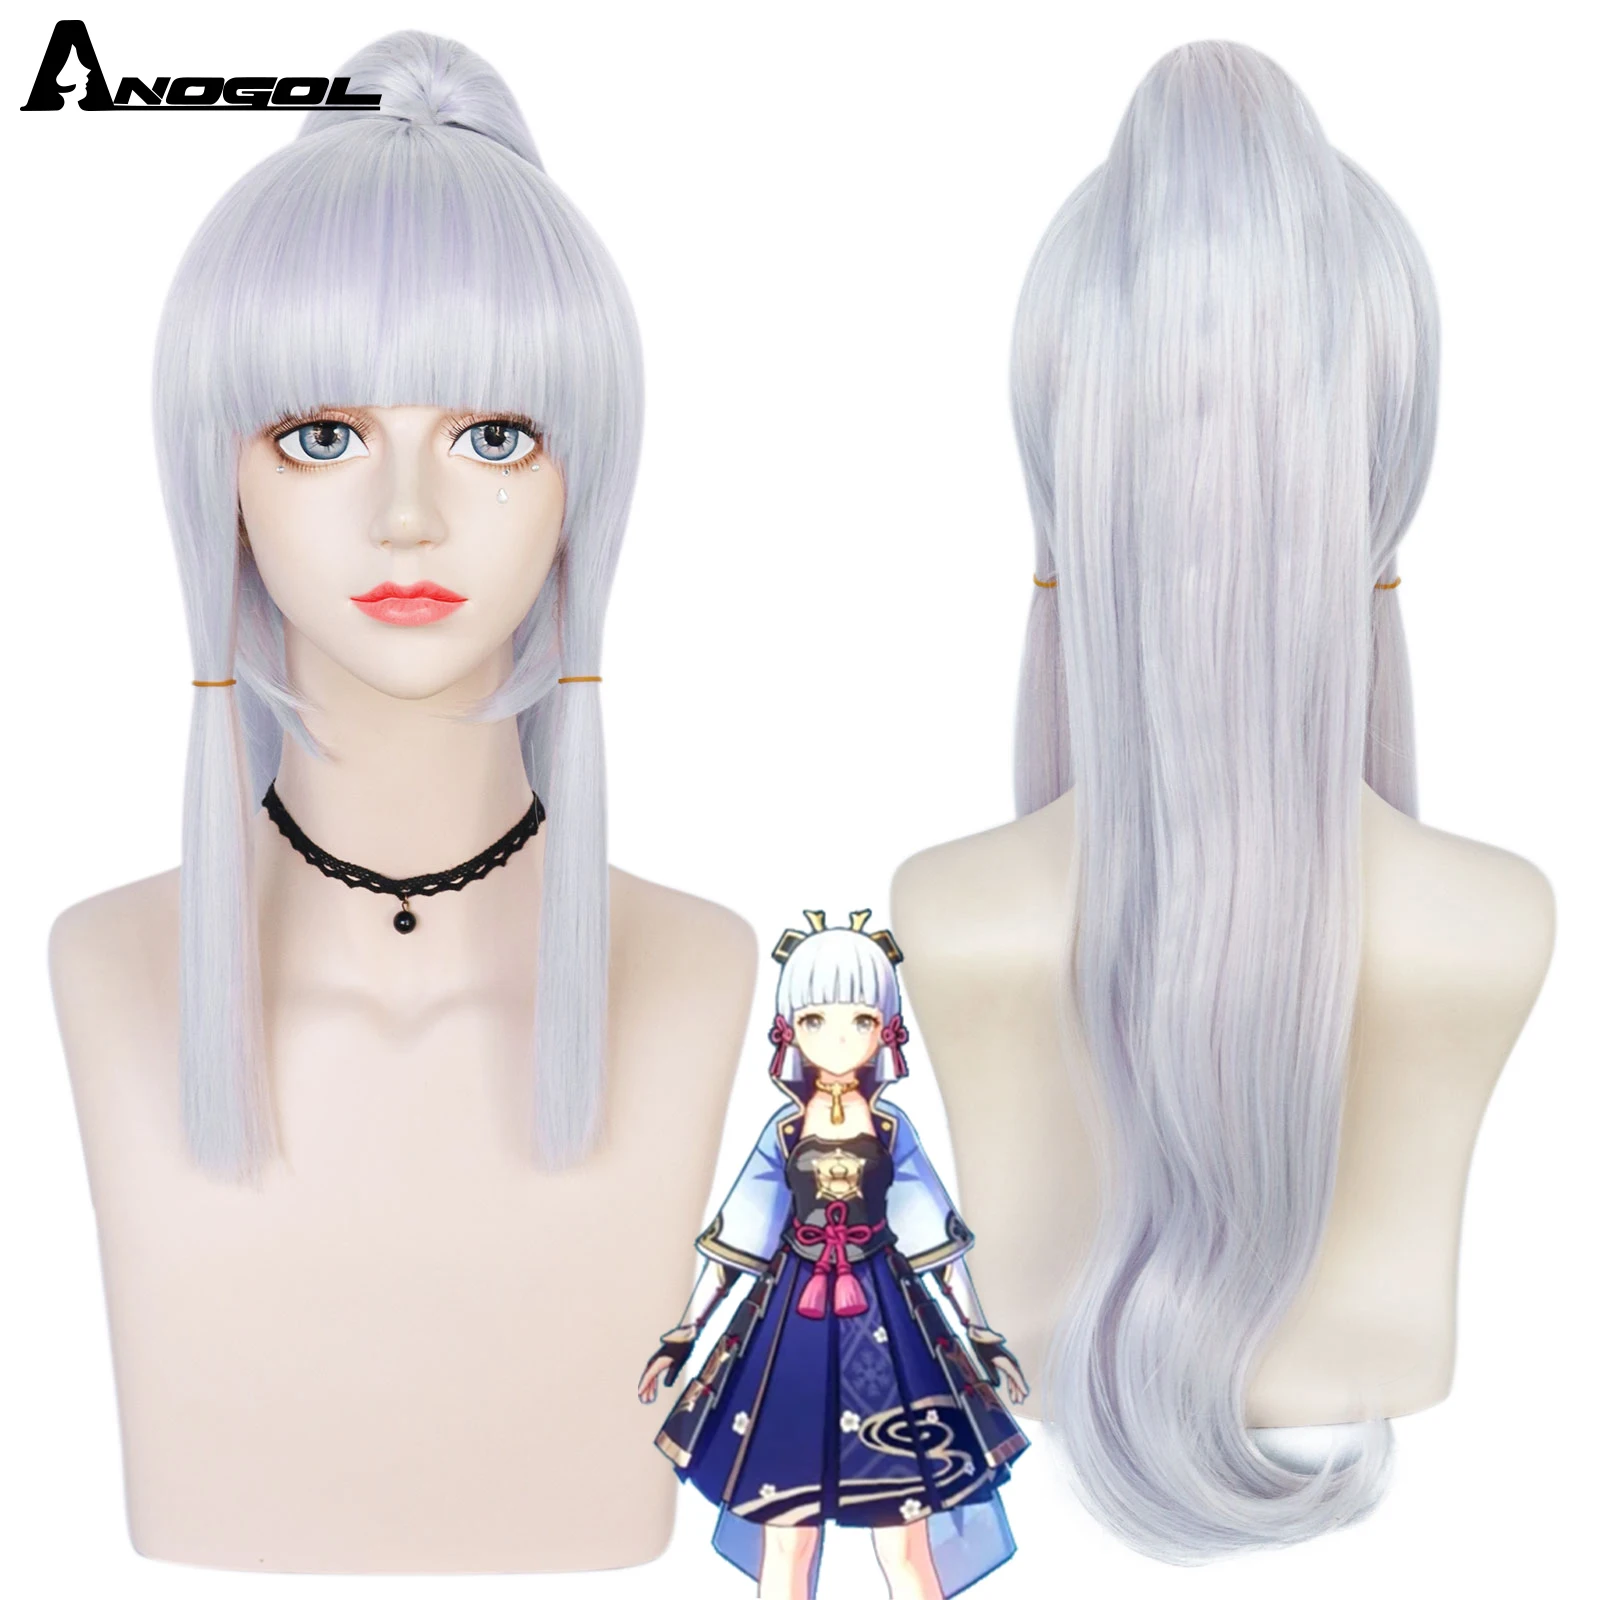 ANOGOL Ayaka Game Genshin Impact Cosplay Wig Long Silver Hair with Bangs Heat Resistant Synthetic Anime Wigs Halloween Party ranyu genshin impact klee wig synthetic straight short blonde game cosplay hair heat resistant wig for party